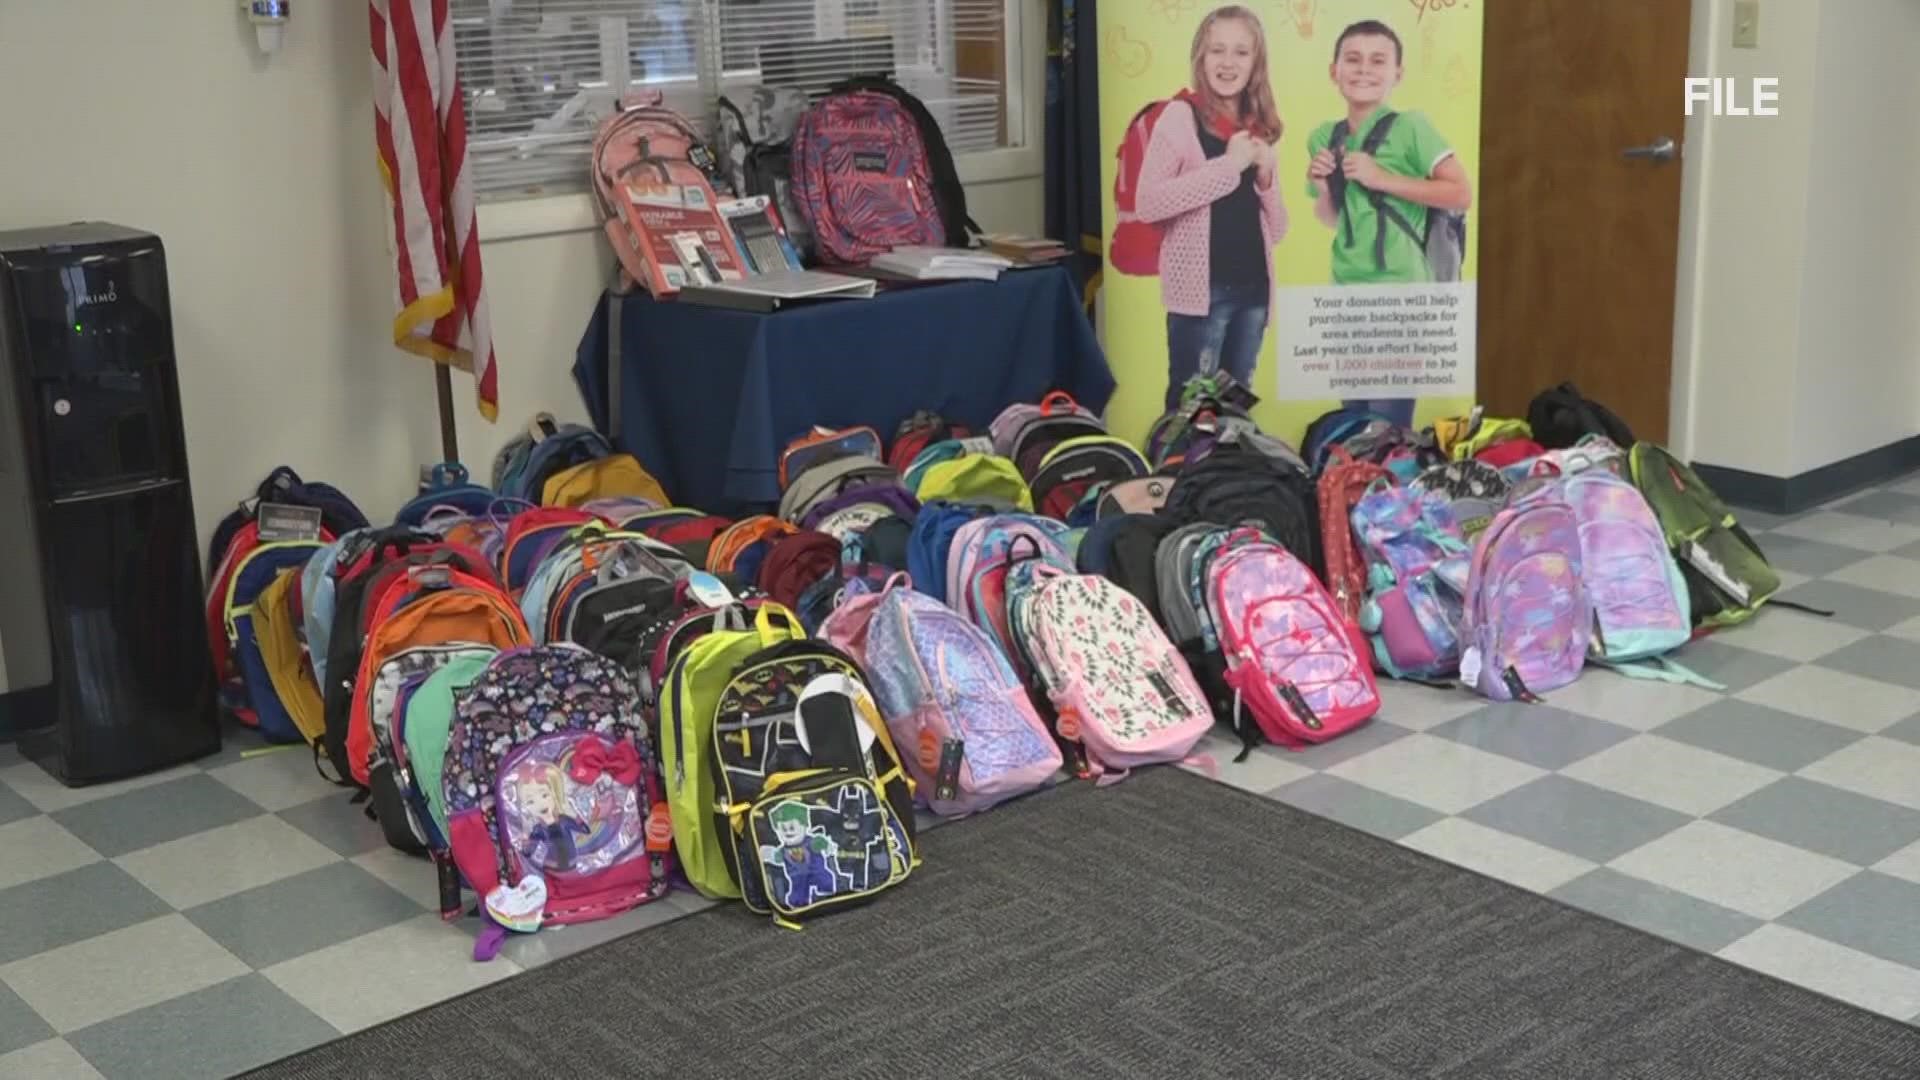 For five years, Ava Burke has requested backpacks in lieu of birthday gifts to help area students be prepared to go back to school.